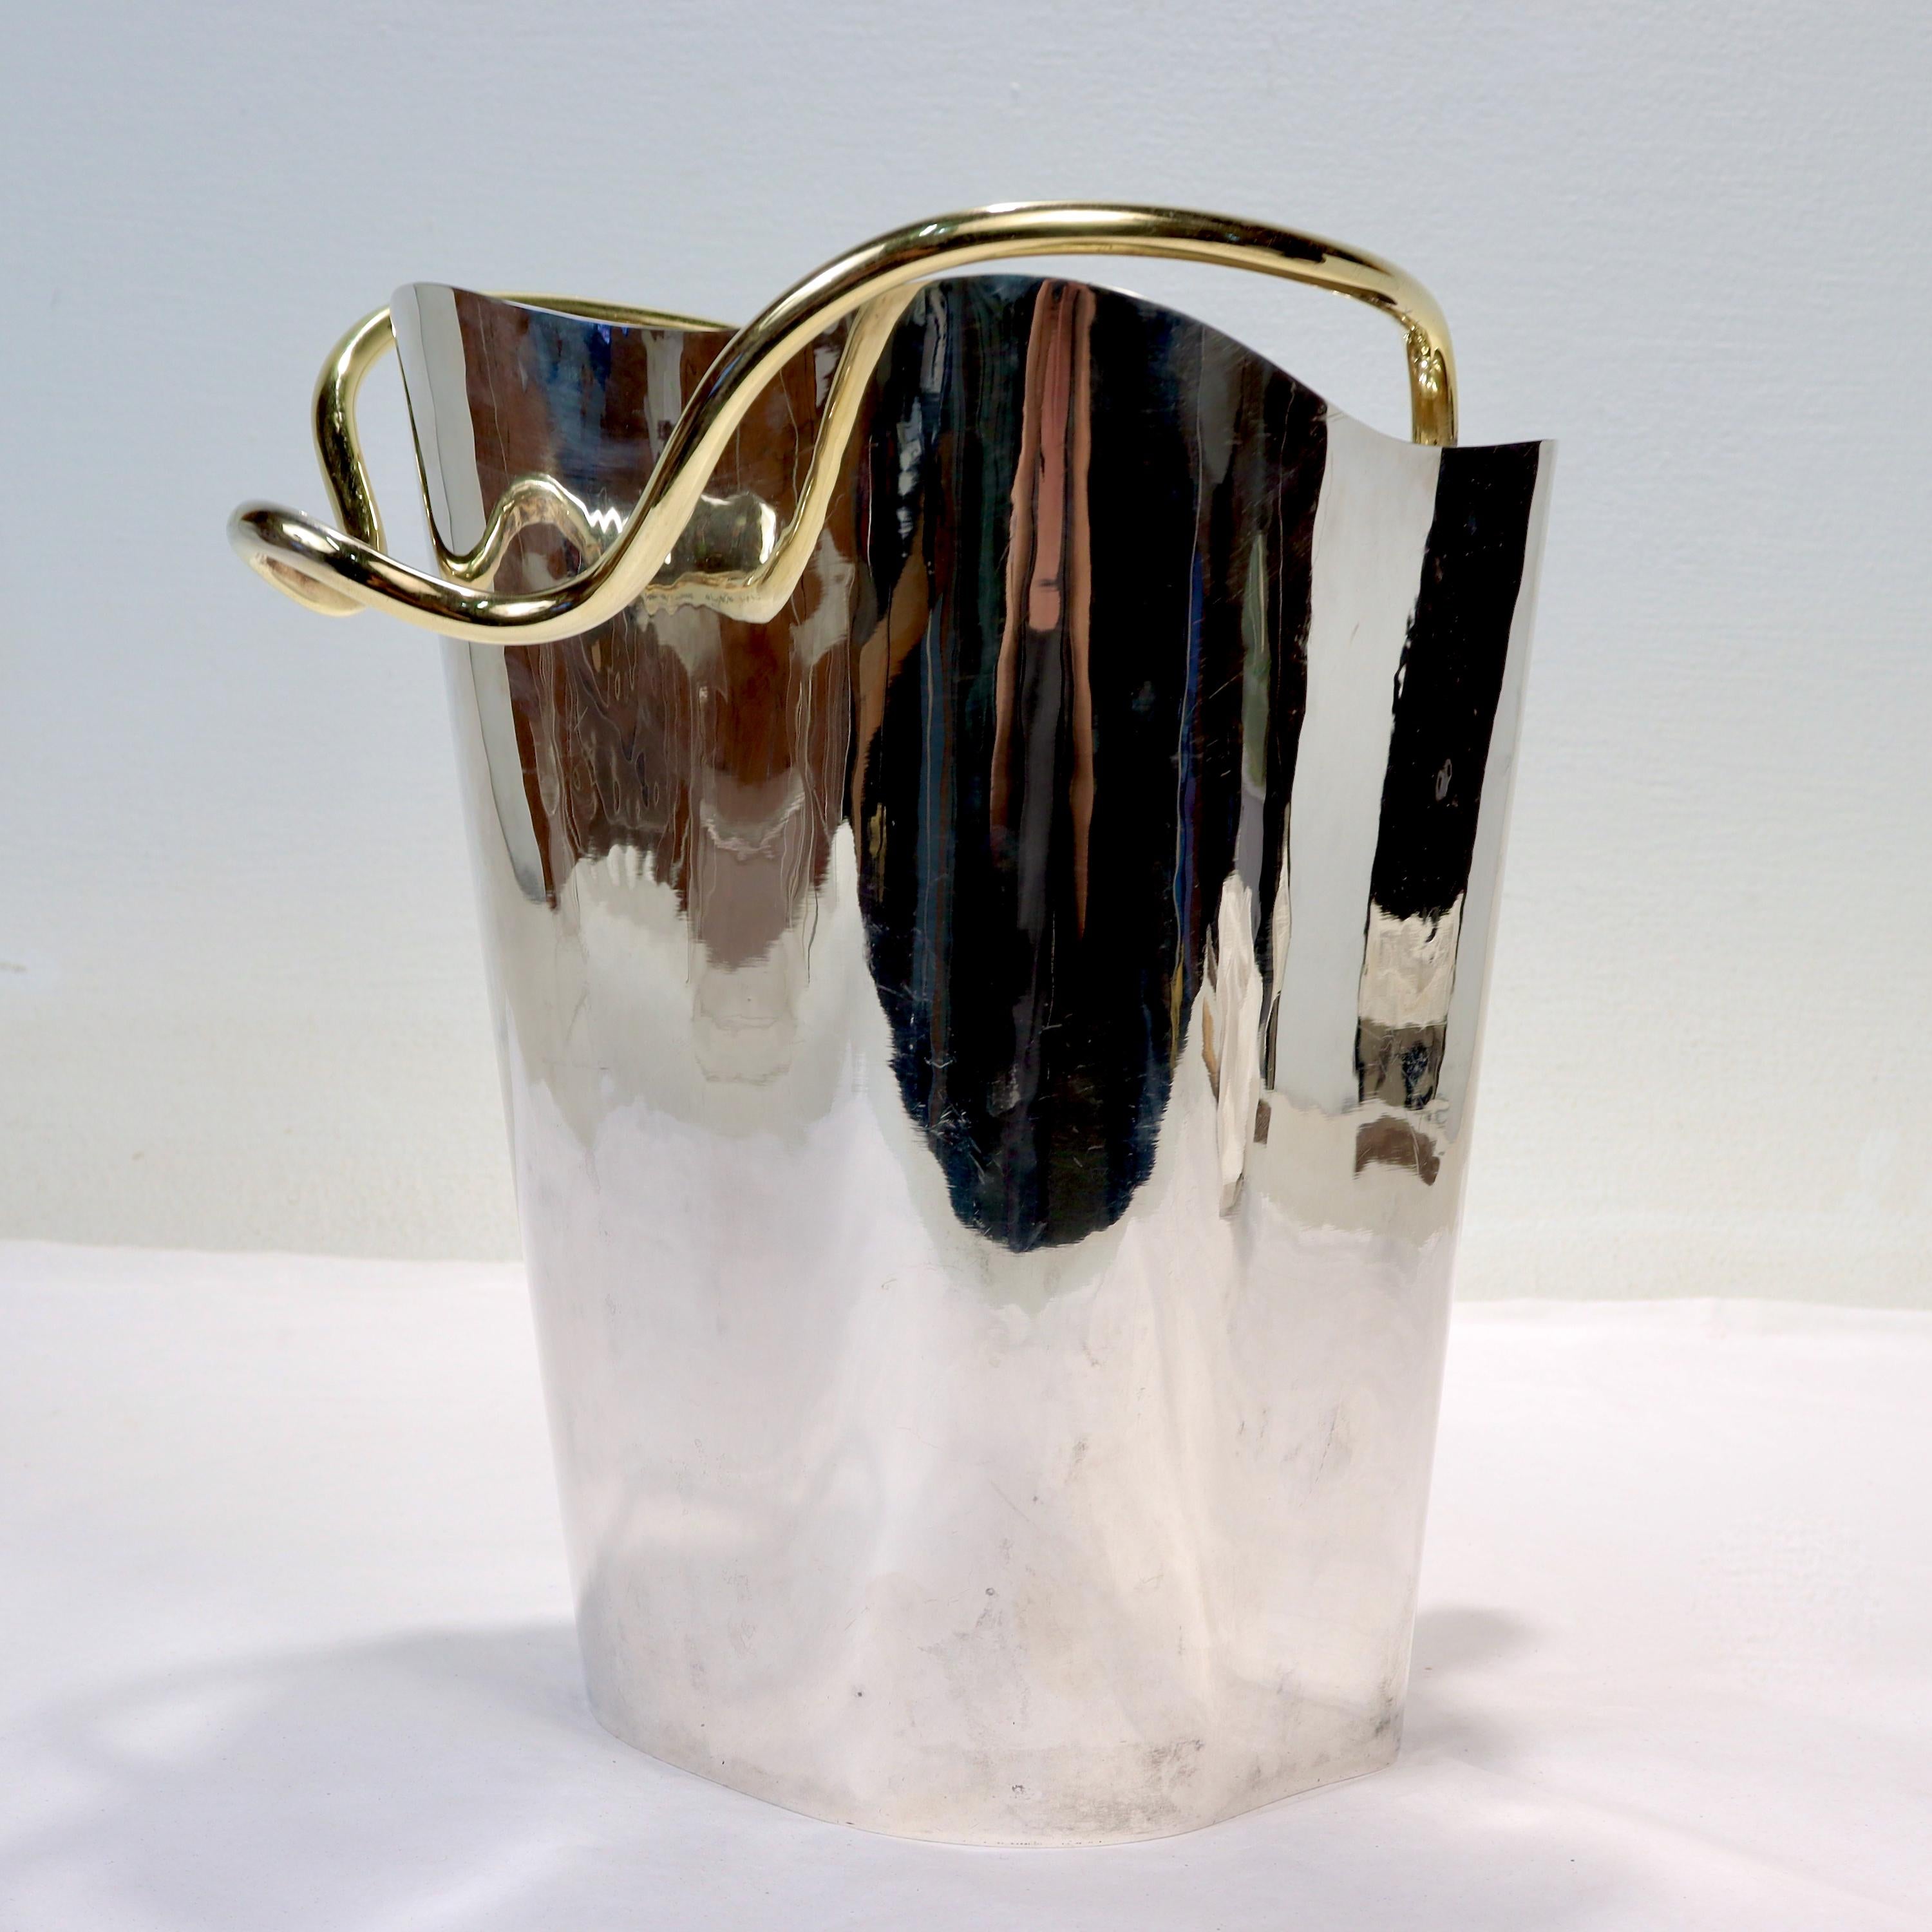 Modernist Sterling Silver Champagne / Ice Bucket by Borek Sipek for Cleto Munari For Sale 3